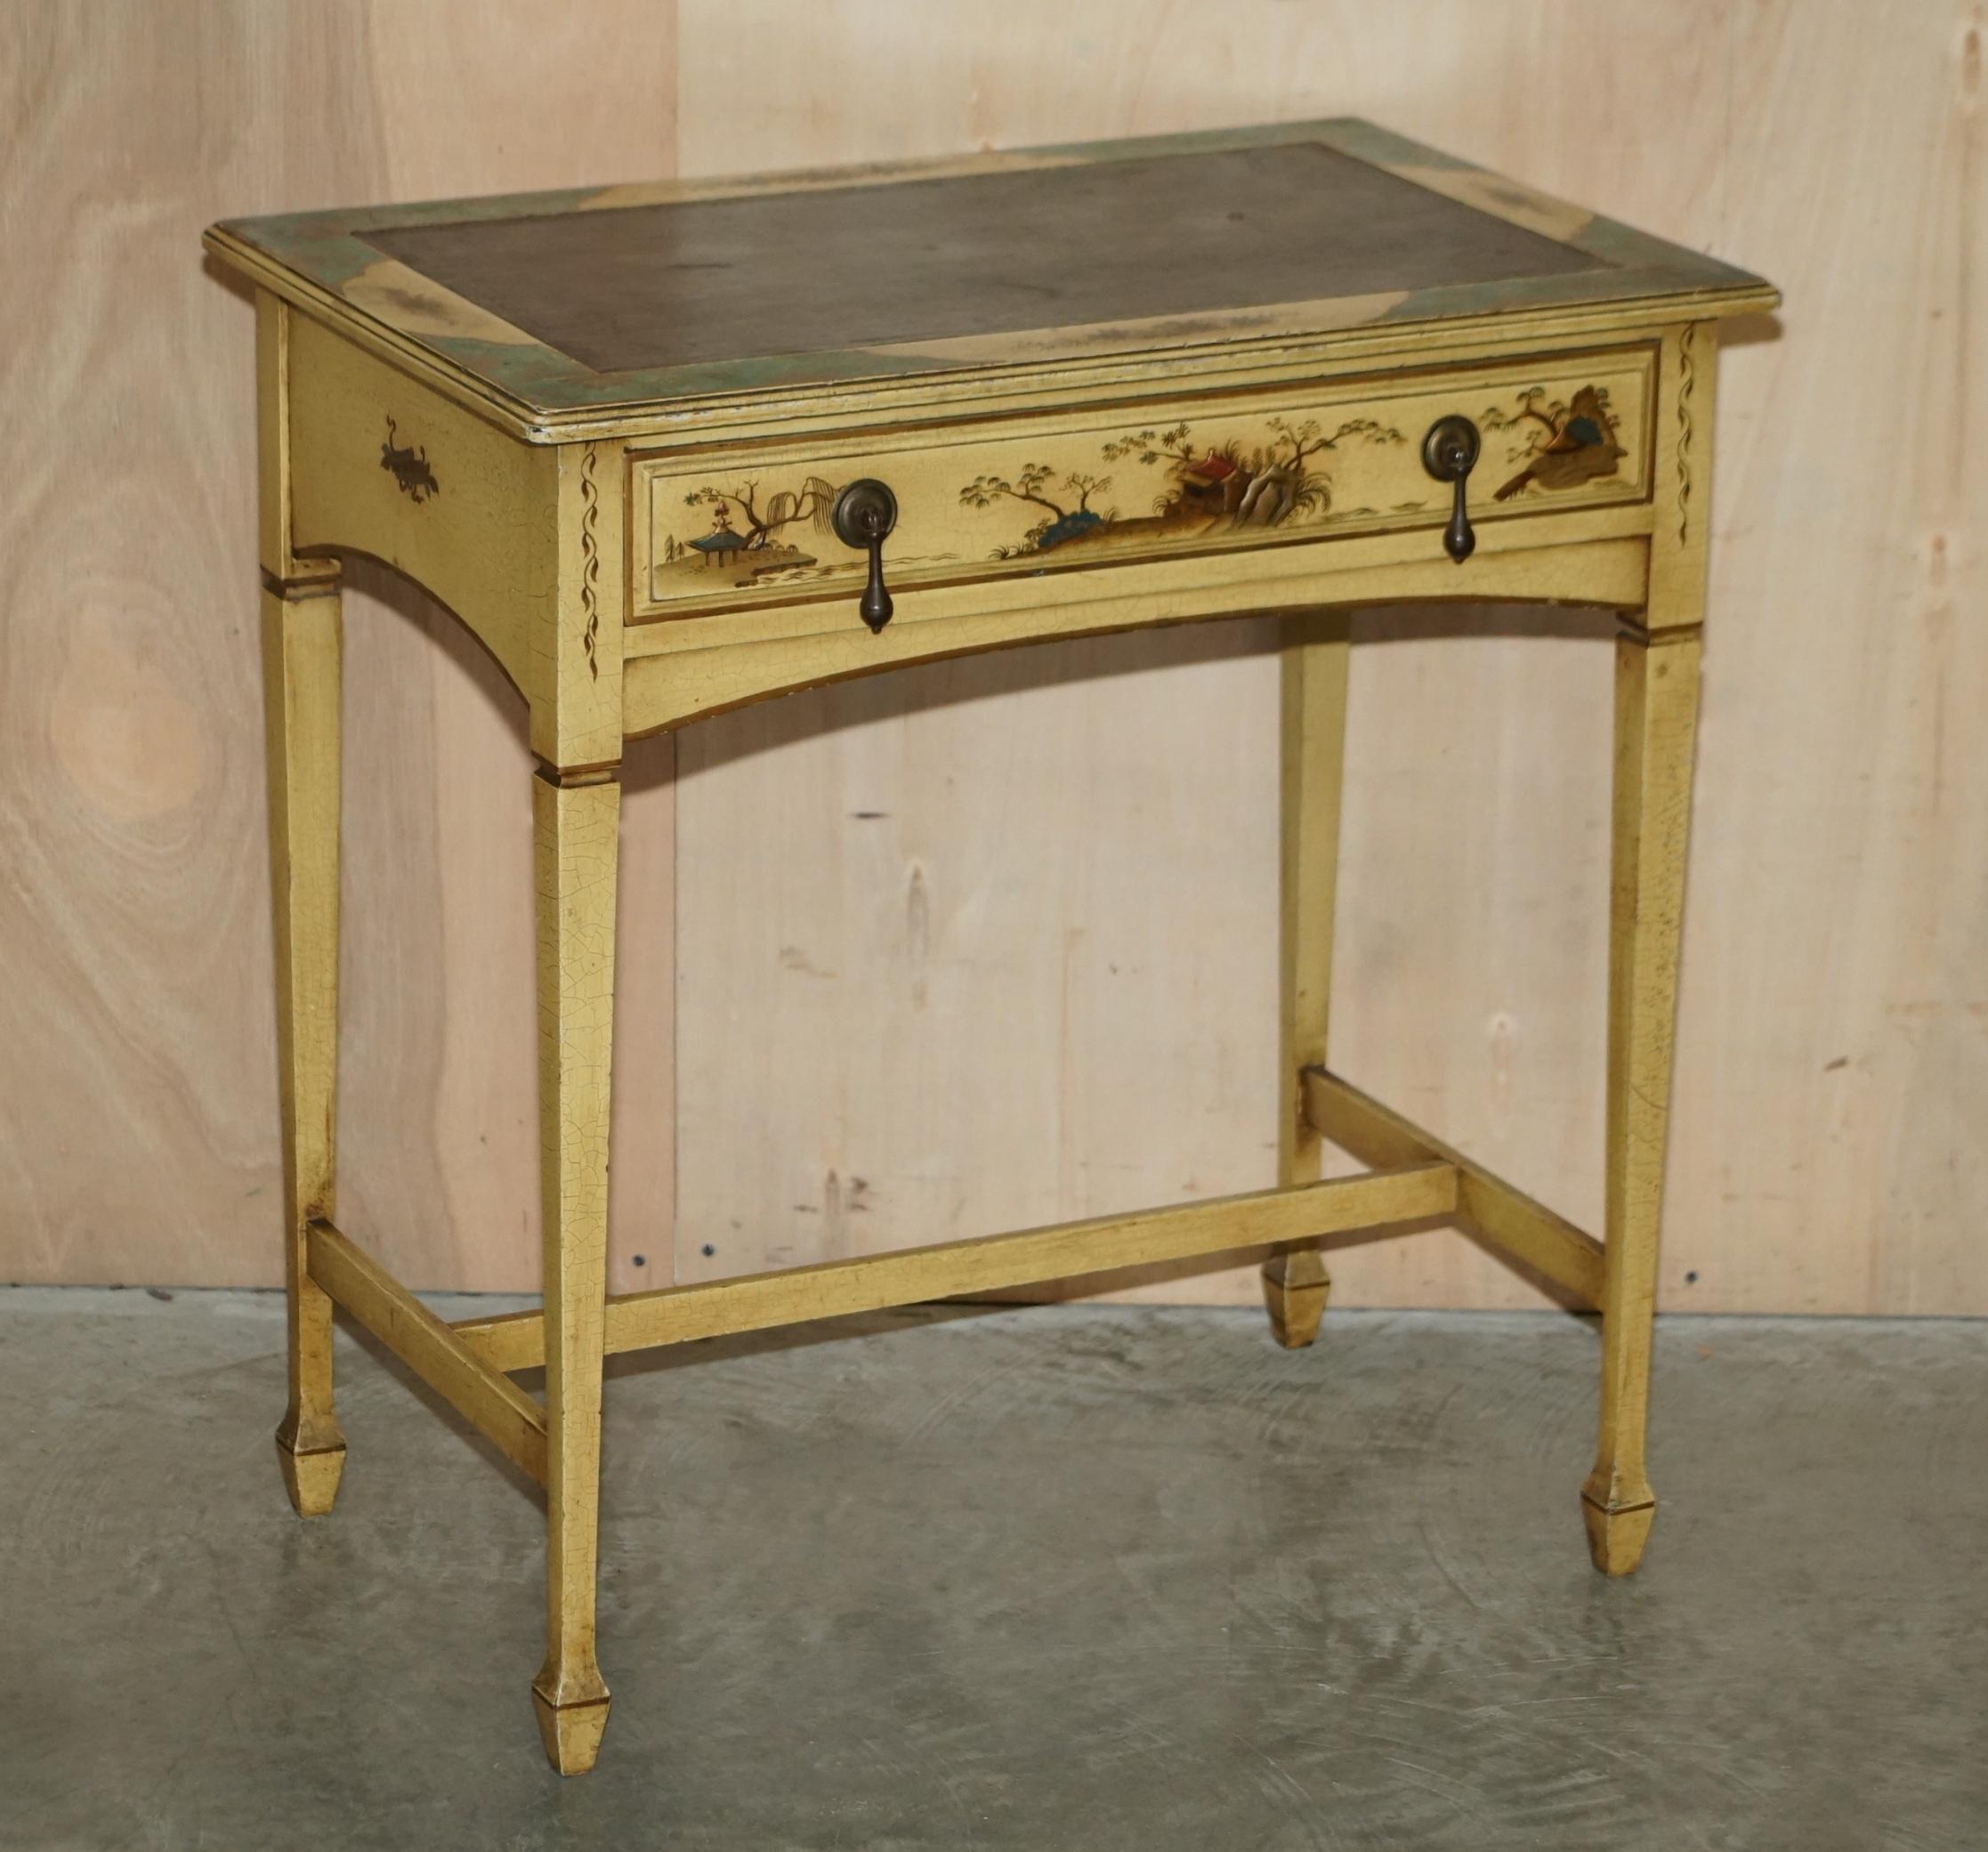 We are delighted to offer for sale this stunning small Chinese Chinoiserie hand painted and lacquered writing table with black leather writing surface and matching stool.

This is a very good looking and well made piece in my favourite style which